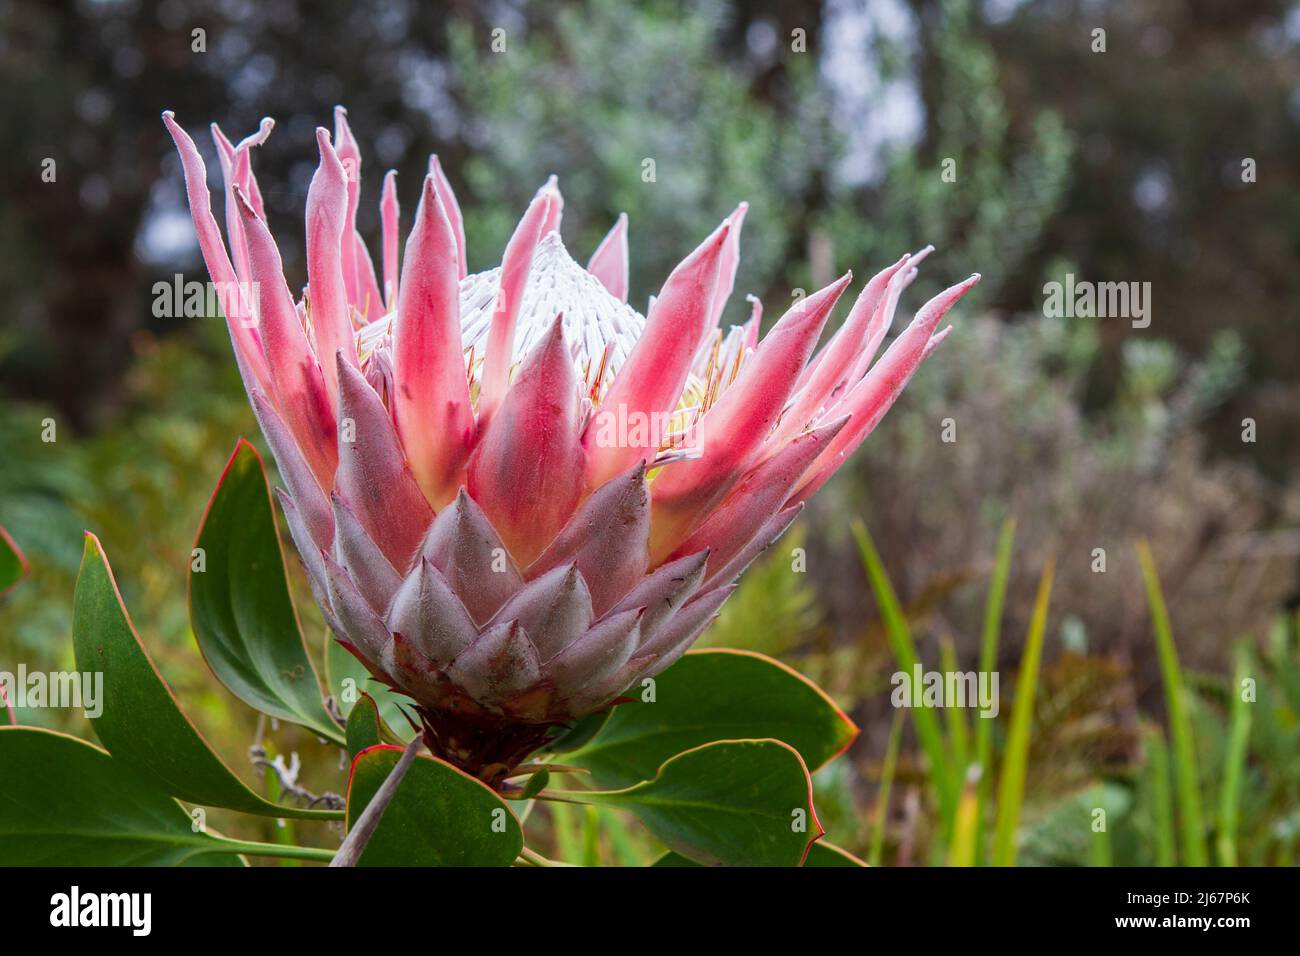 Closeup image of a large blooming King Protea flower (Protea cynaroides) growing on the island of Maui, Hawaii, USA. Stock Photo